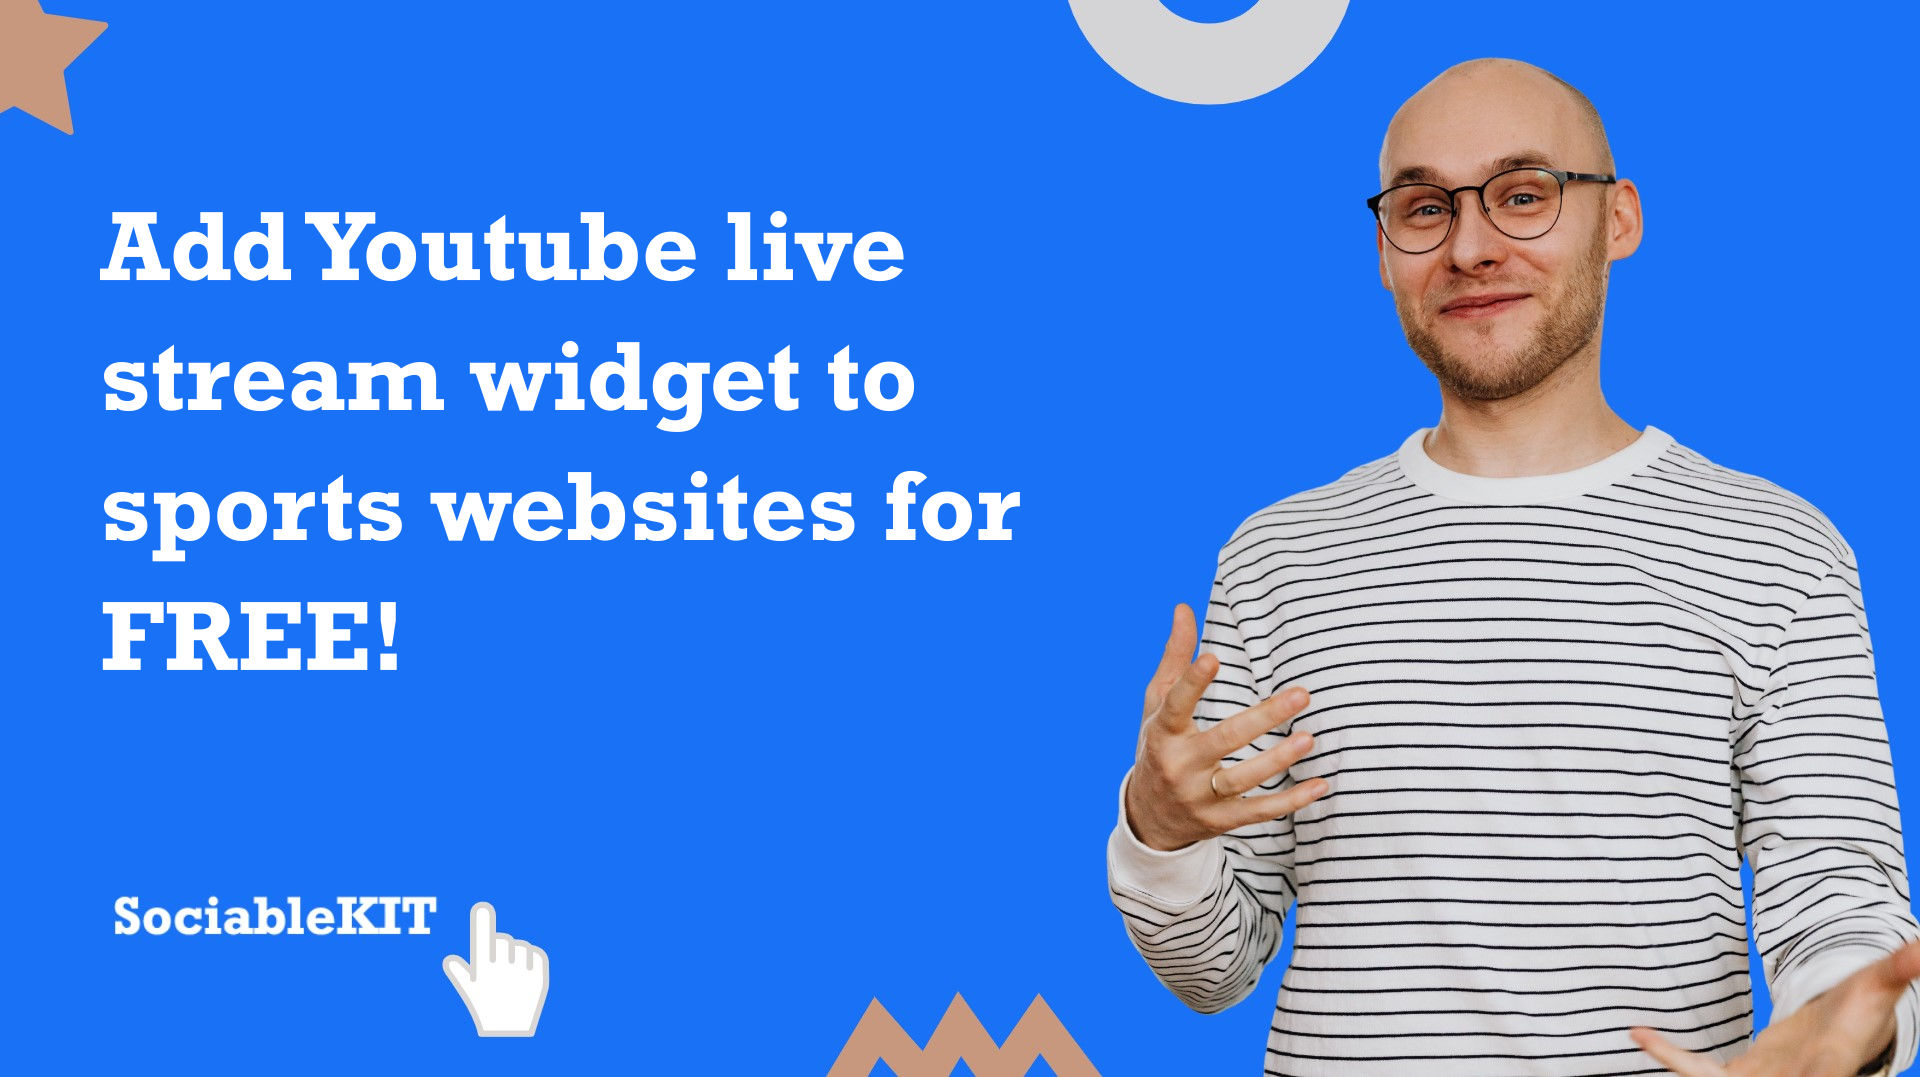 How to add Youtube live stream widget to sports websites for FREE?